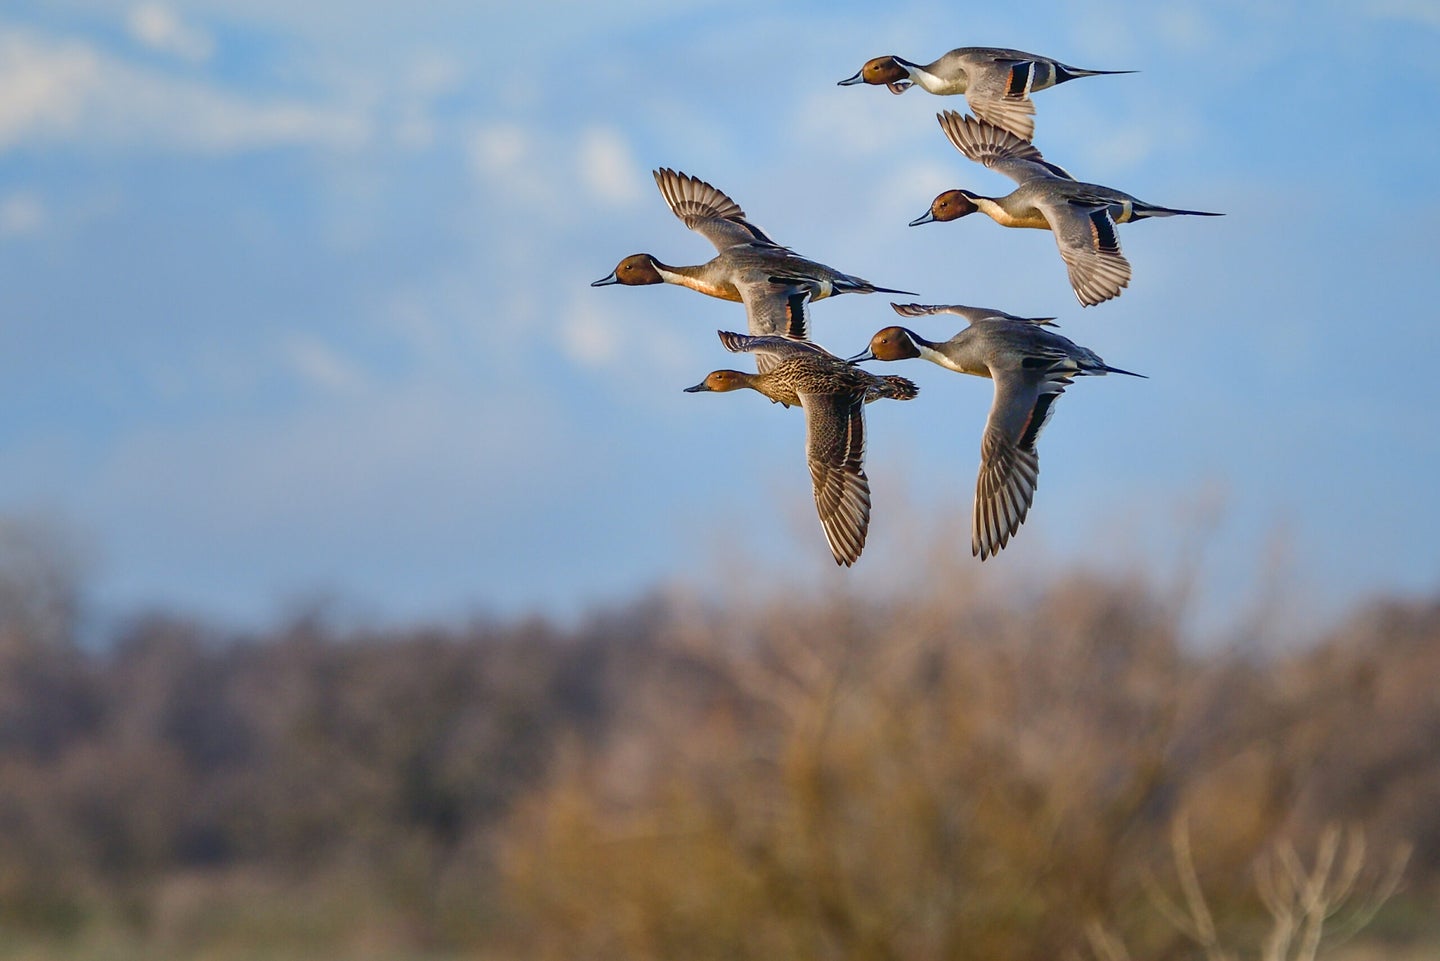 Northern Pintail courtshp flight during winter migration at Llano Seco National Wildlife Refuge